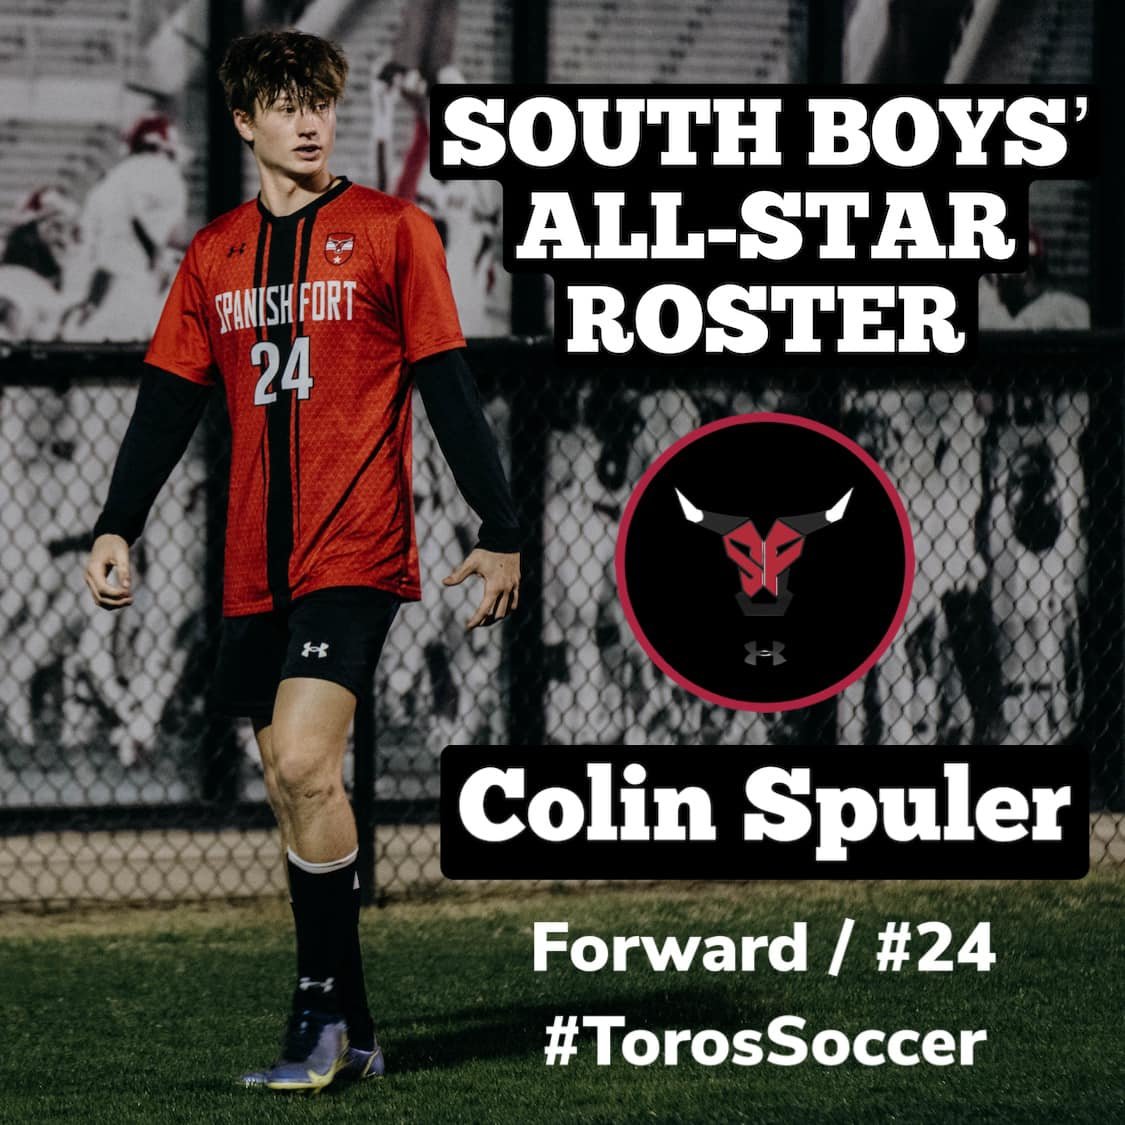 Spanish Fort’s Colin Spuler was named to the South All-Star soccer team for the 2022 AHSAA North-South All-Star Sports Week in July. He’ll be joined by two other Baldwin County soccer players on the roster.